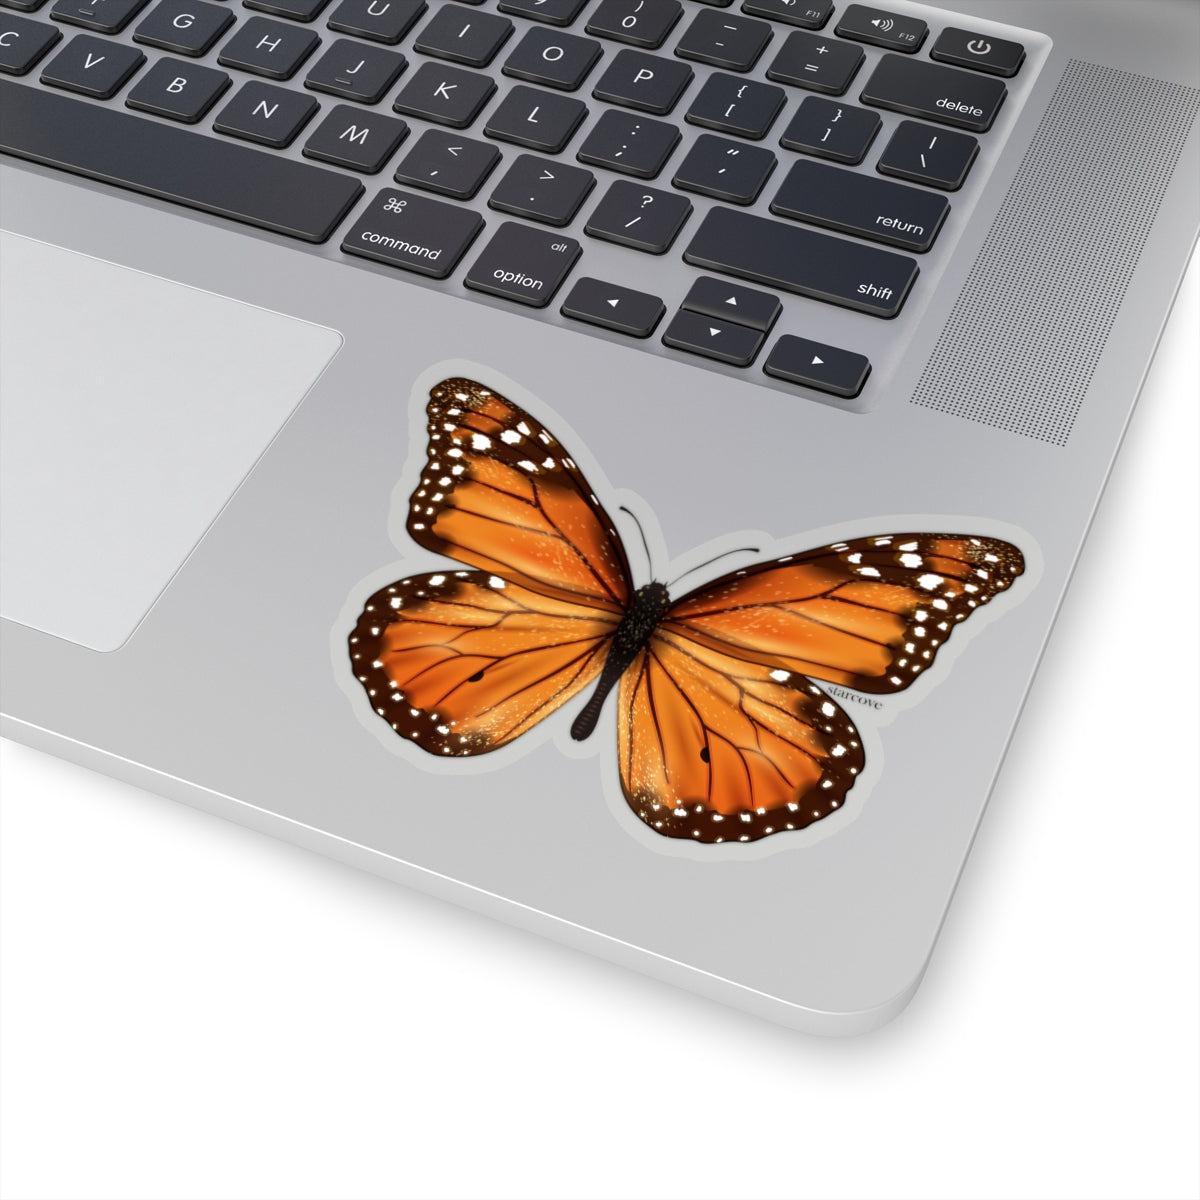 Monarch Butterfly Decal Art Stickers decoration Insect Laptop Vinyl Cute Waterproof Waterbottle Tumbler Car Bumper Aesthetic Label Wall Starcove Fashion